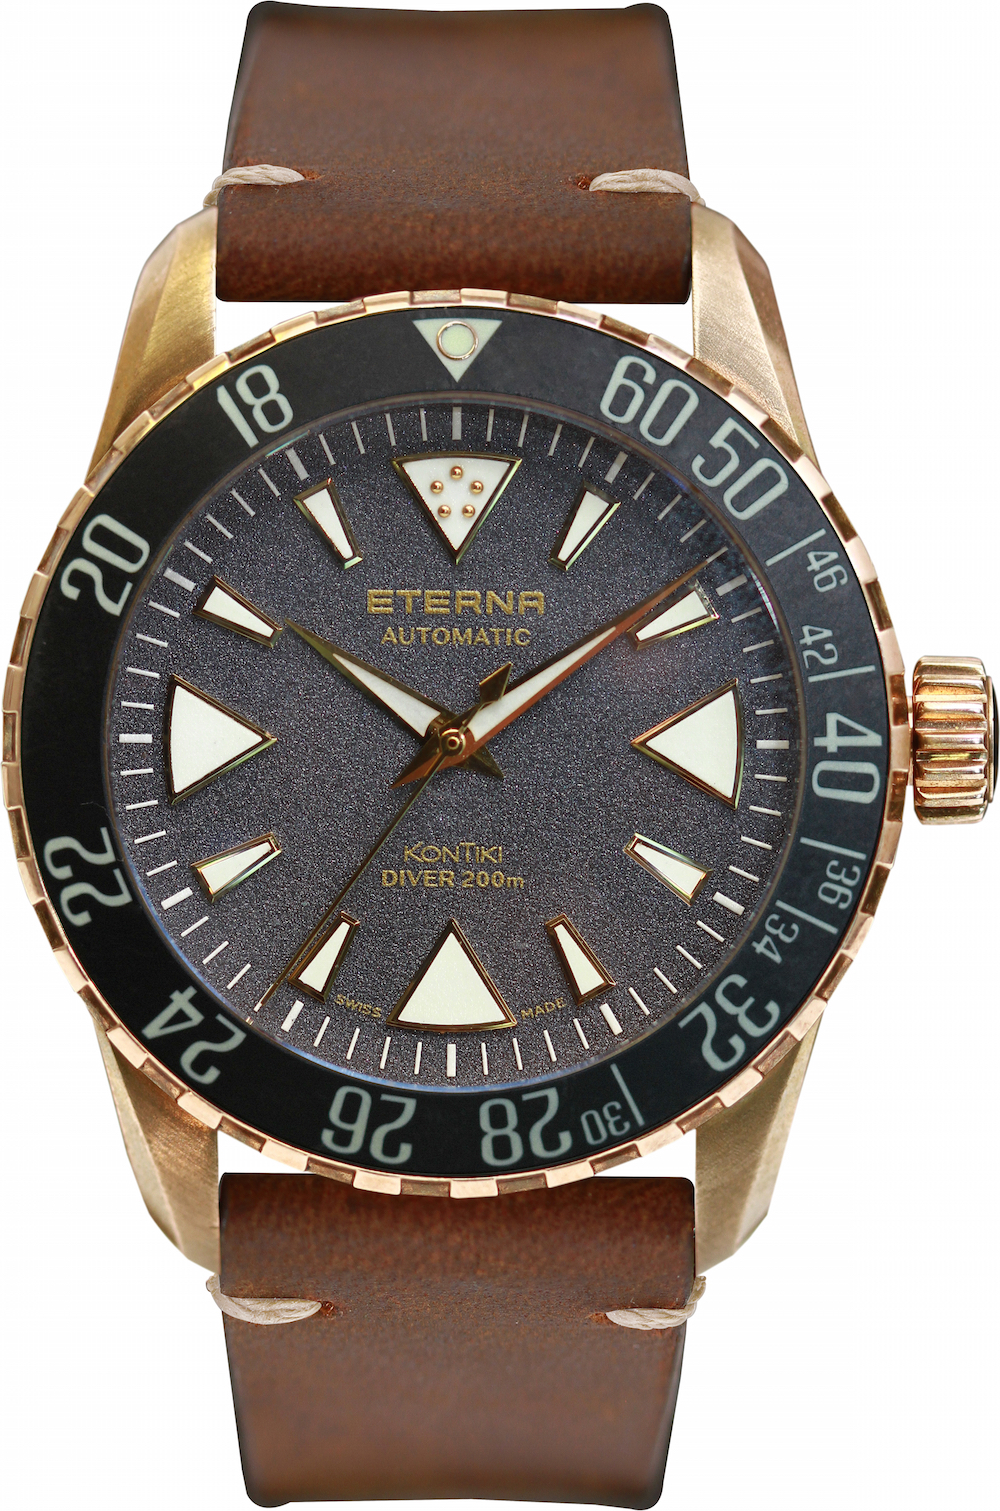 Eterna KonTiki Bronze Manufacture watch honoring the 70th anniversary of the famed KonTiki expedition.